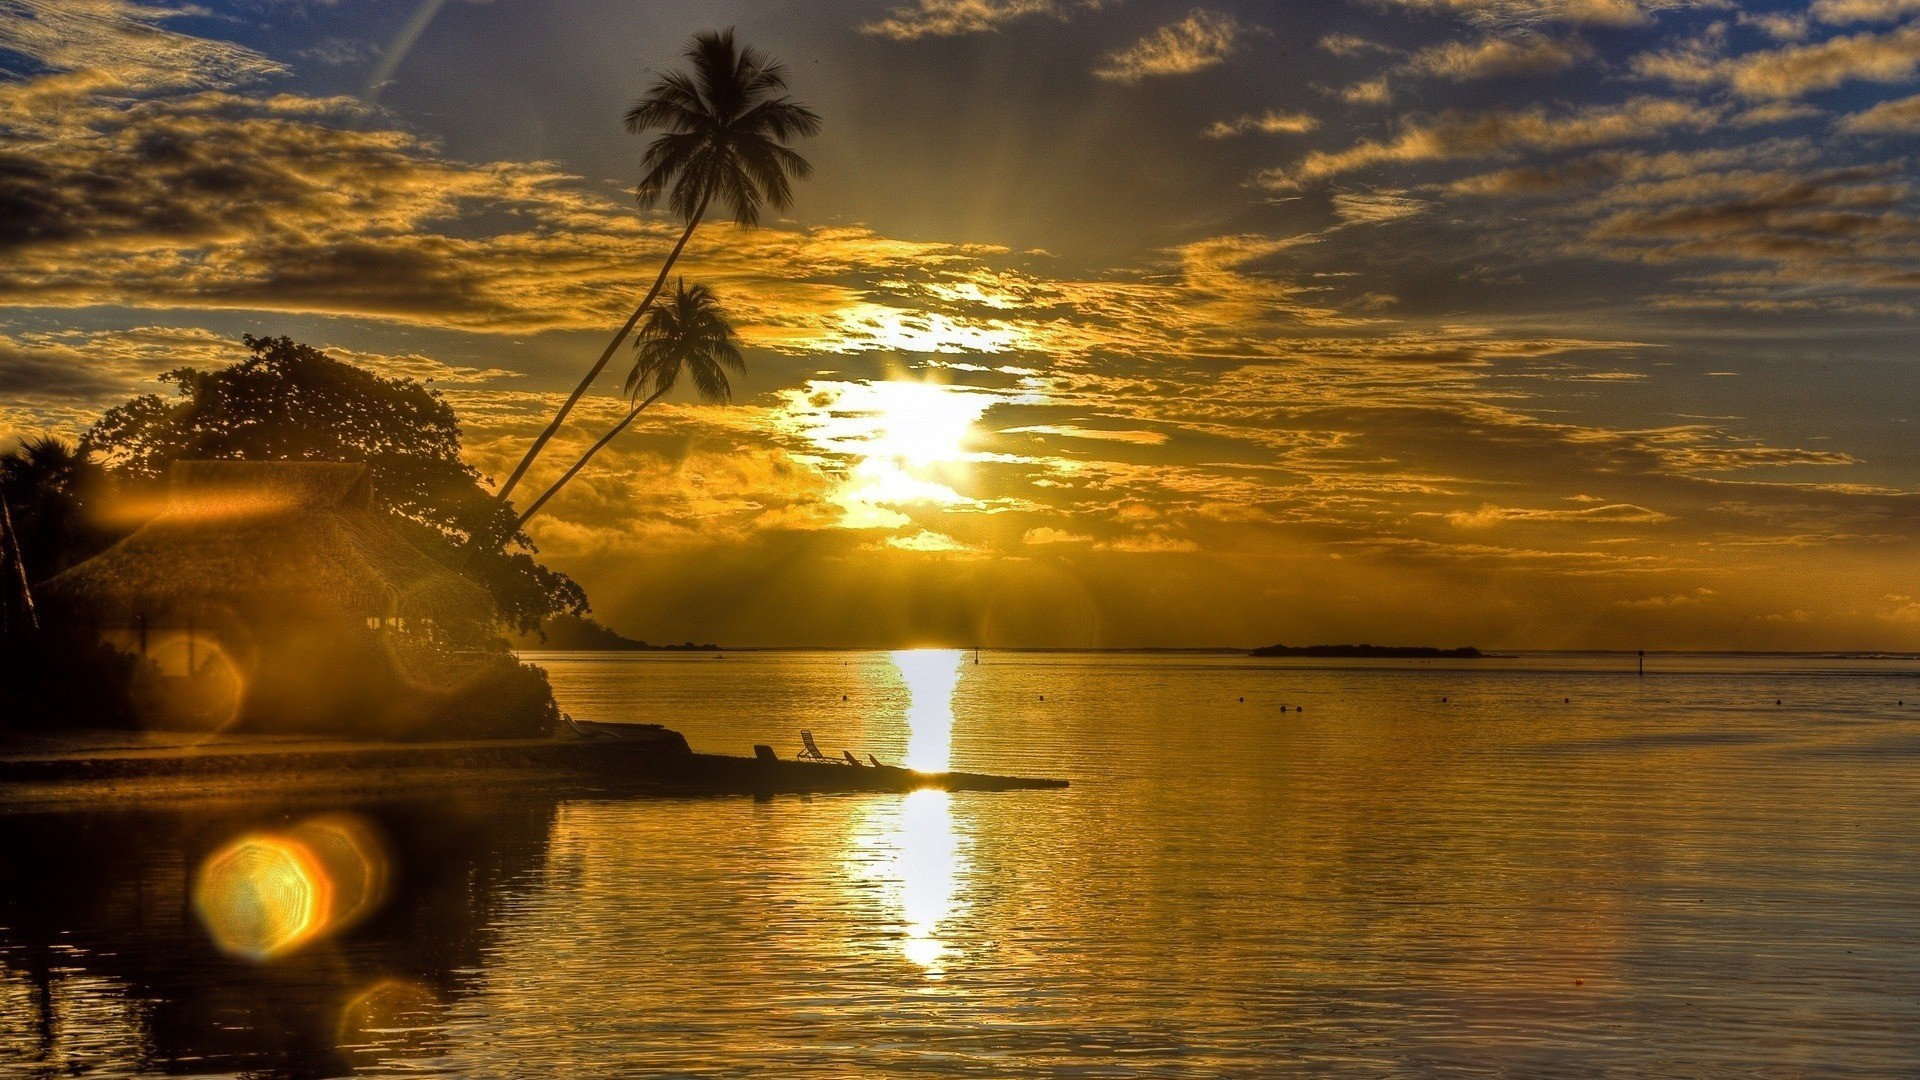 General 1920x1080 nature sunset sunlight water clouds palm trees sky